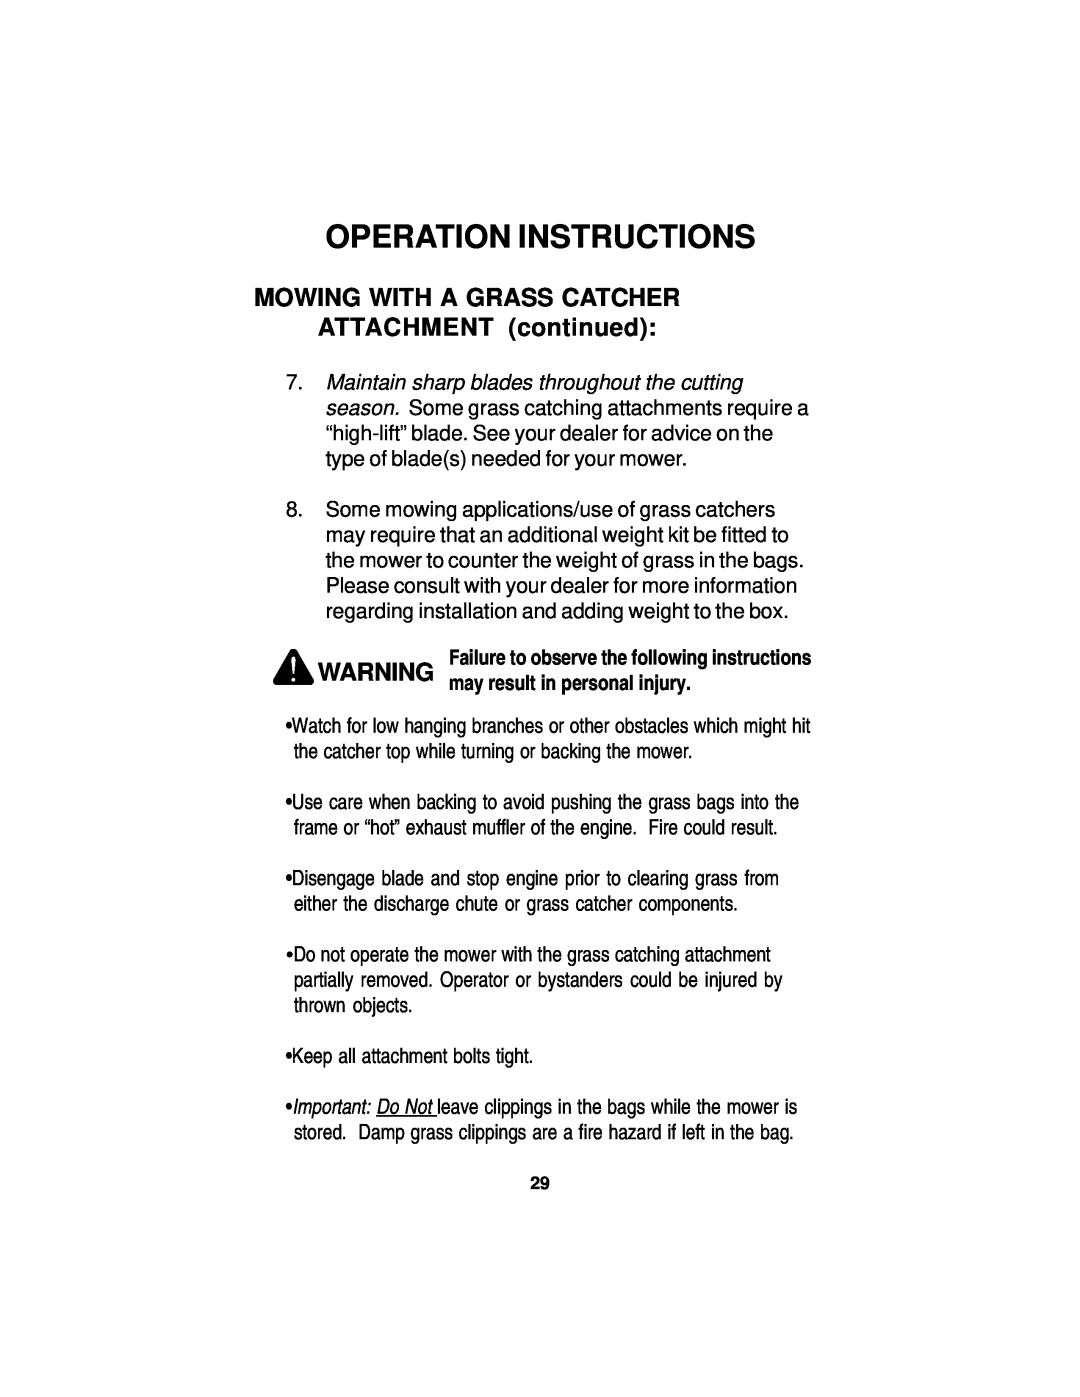 Dixon 14295-0804 manual MOWING WITH A GRASS CATCHER ATTACHMENT continued, Operation Instructions 